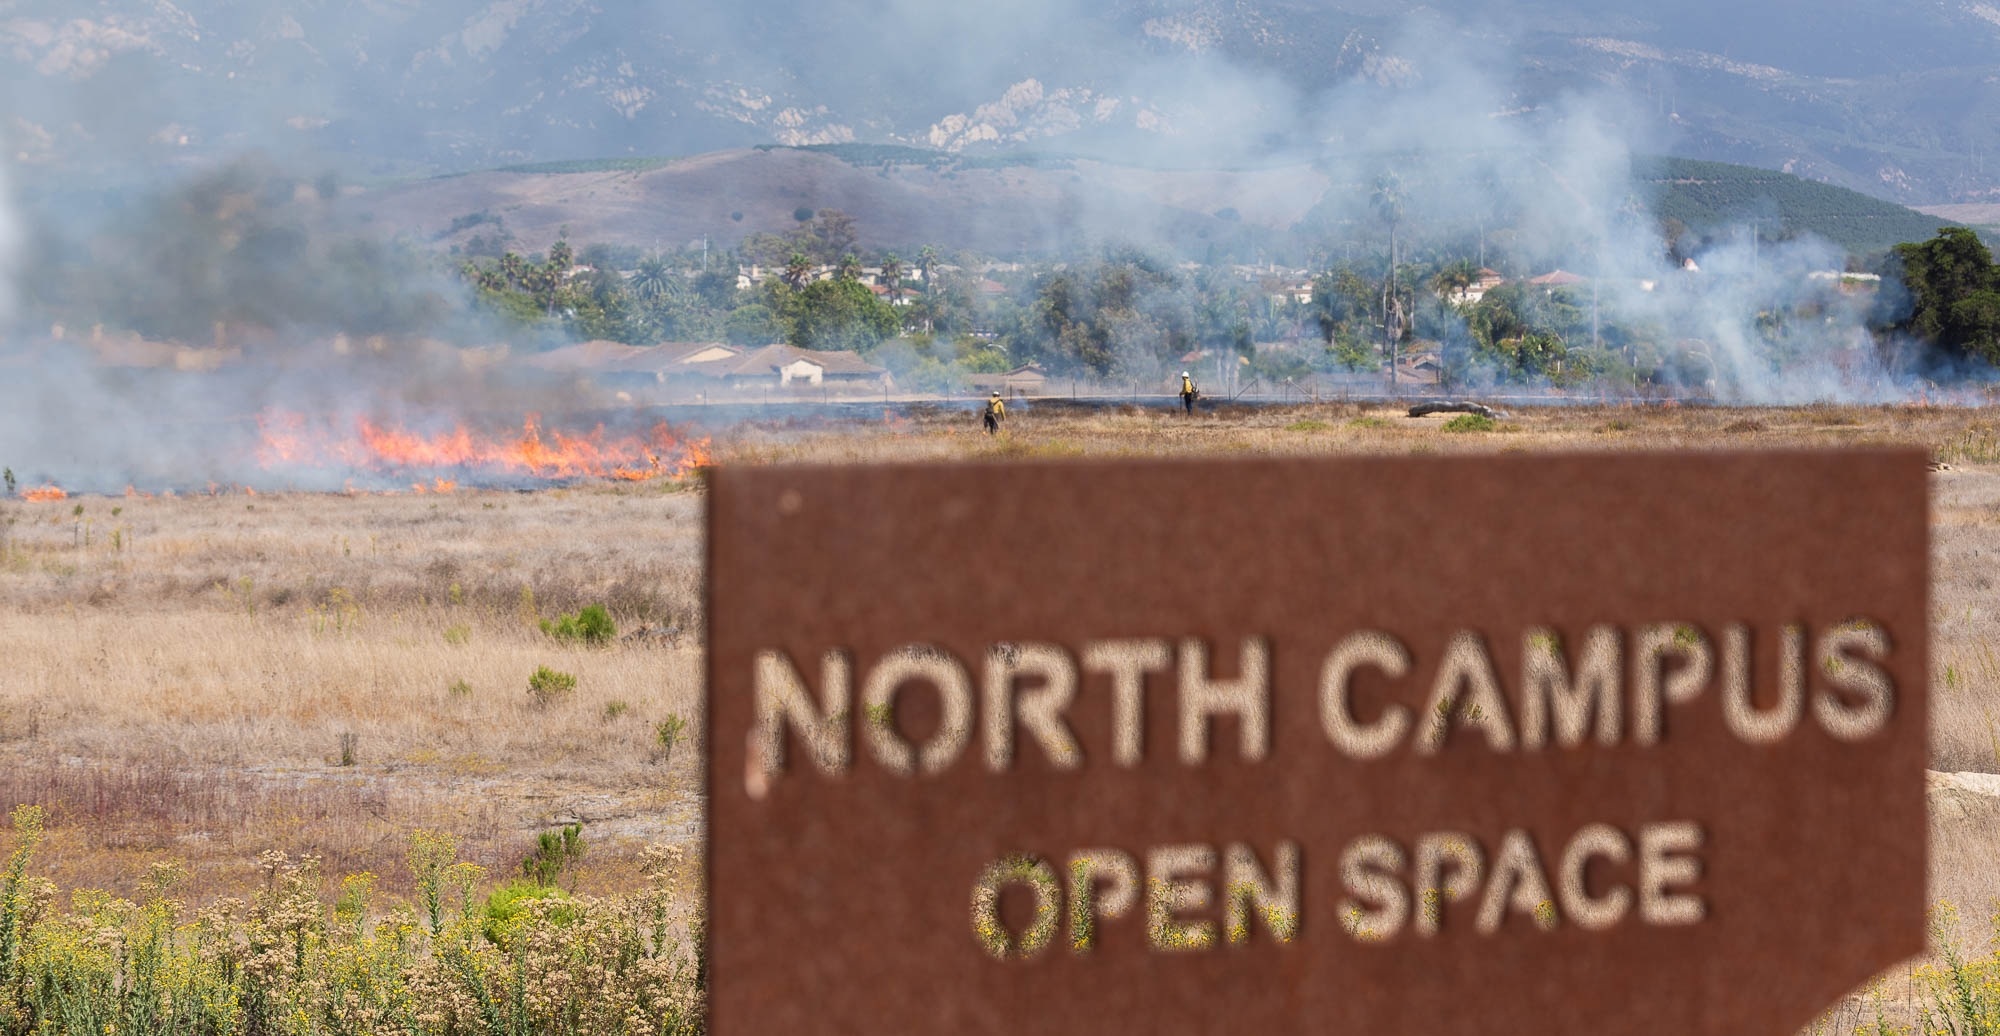 A sign reading "North Campus Open Space" in the foreground with a smoking brush fire in the background